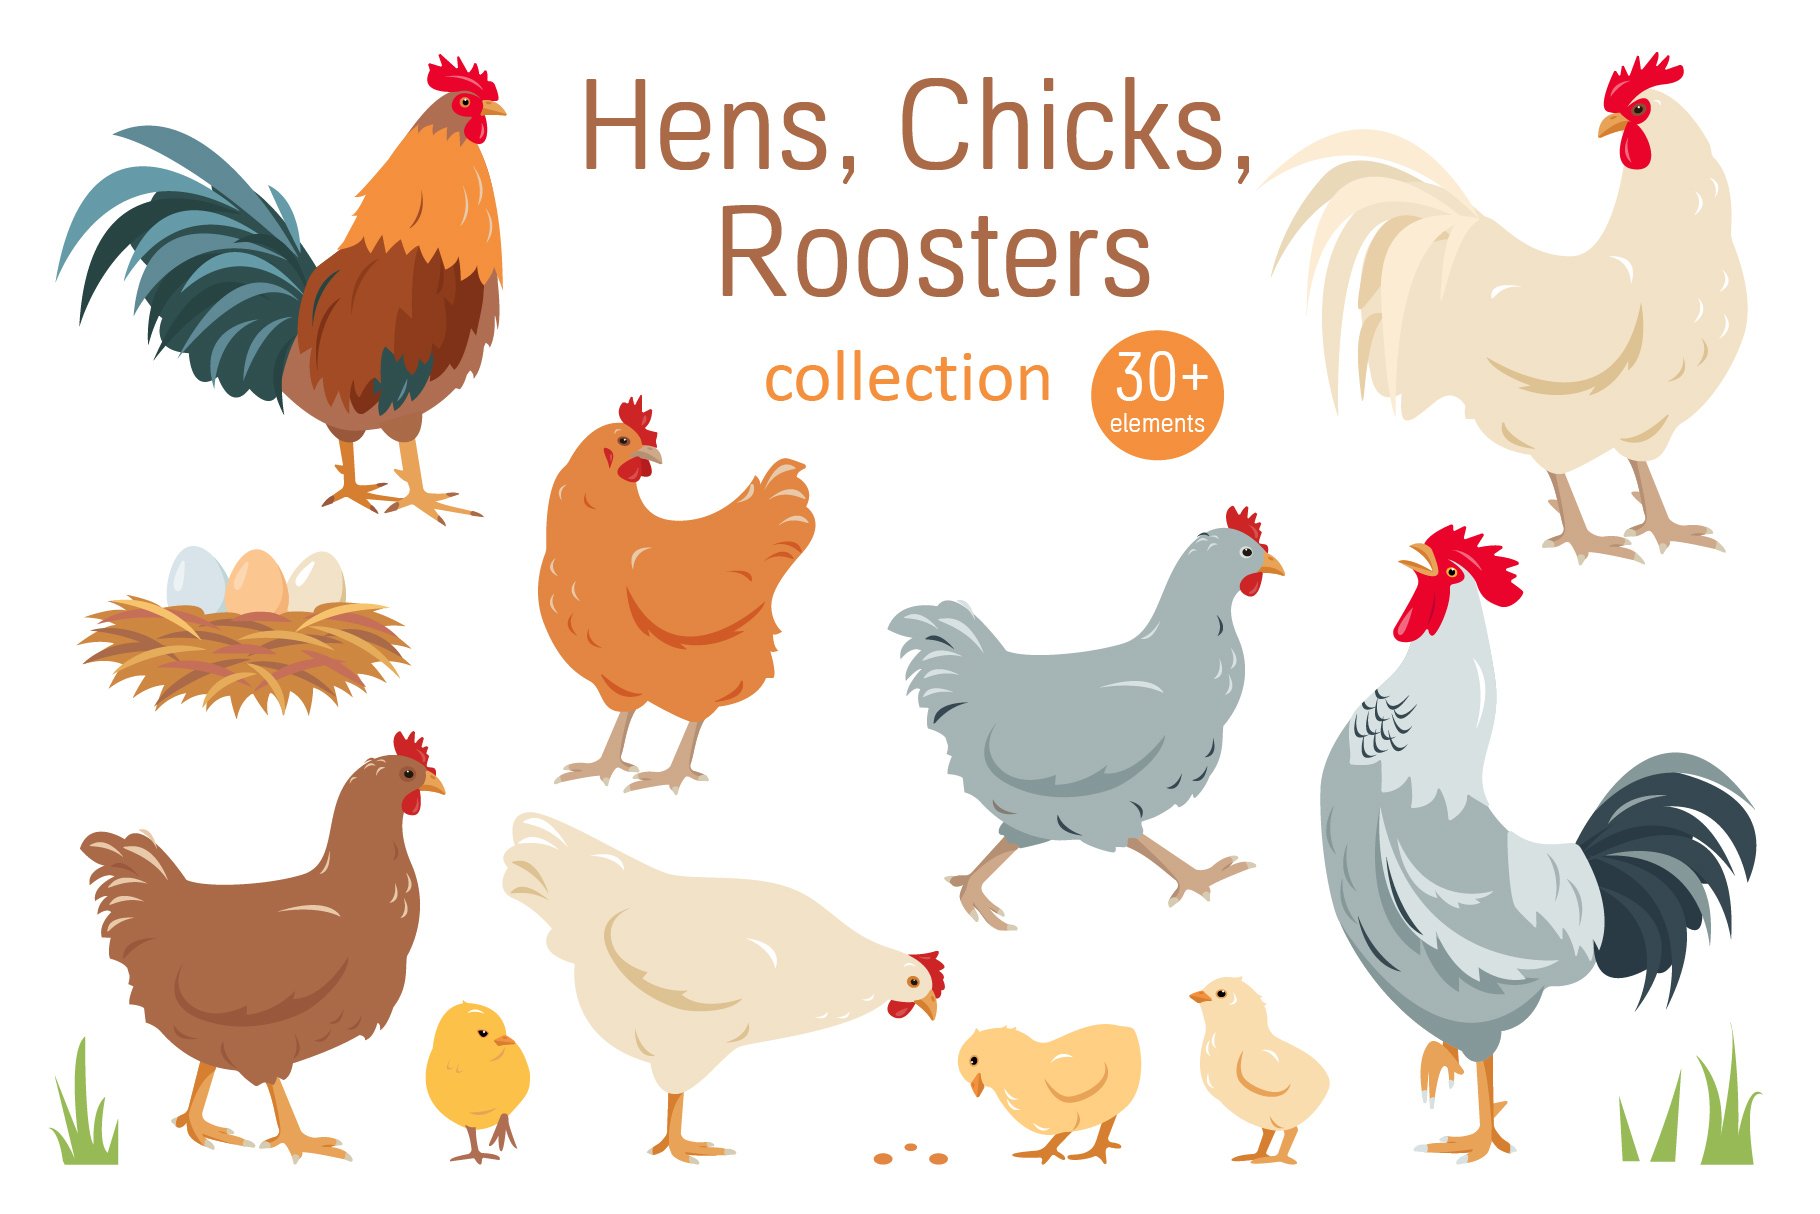 Hens, Chicks and Roosters cover image.